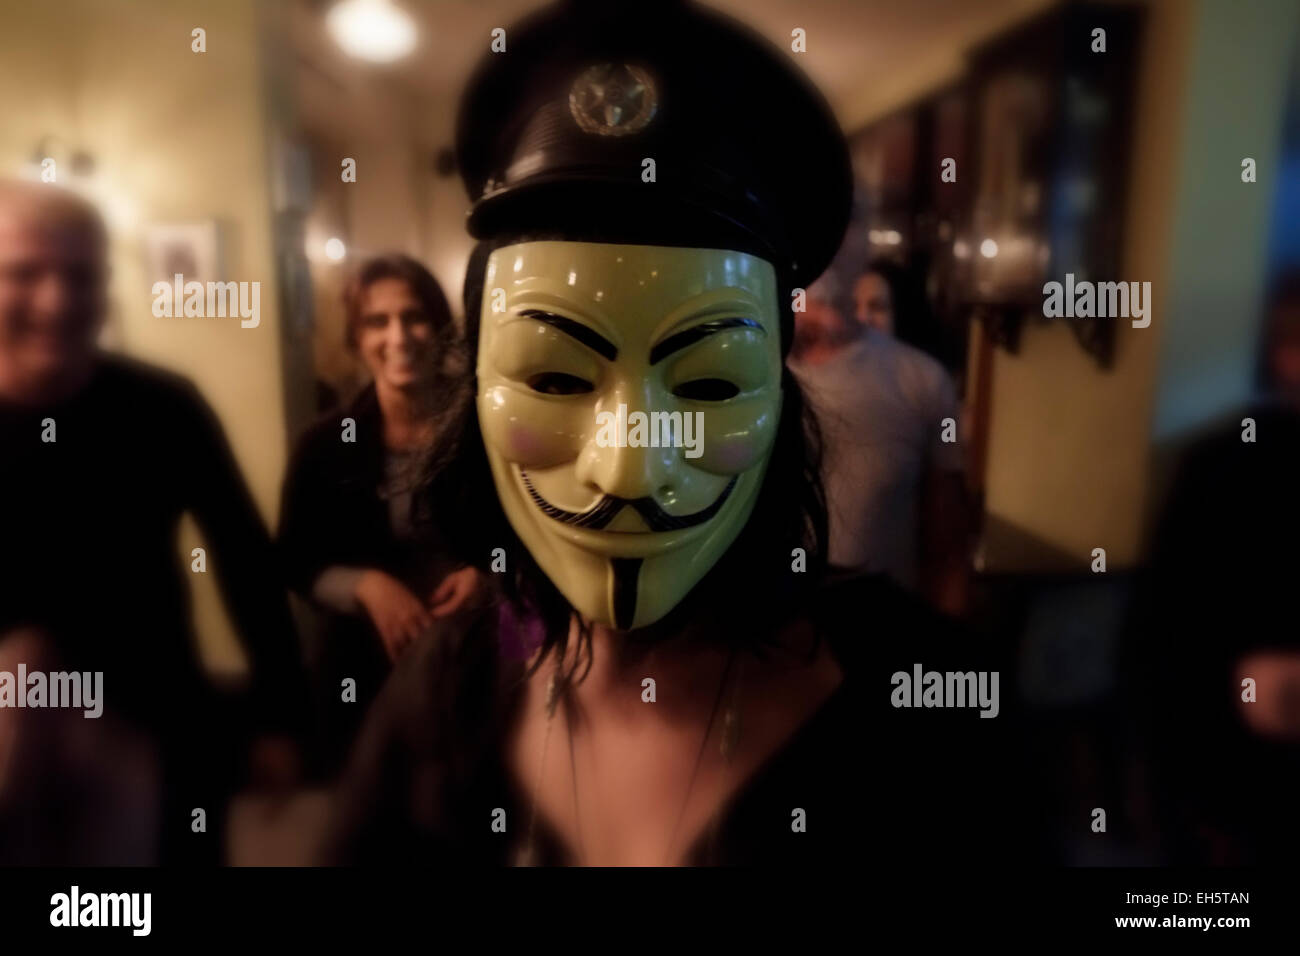 Woman wearing Guy Fawkes mask in a restaurant bar in West Jerusalem Israel. The Guy Fawkes mask is a well-known symbol for the online hacktivist group Anonymous used in anti-government and anti-establishment protests around the world. Stock Photo